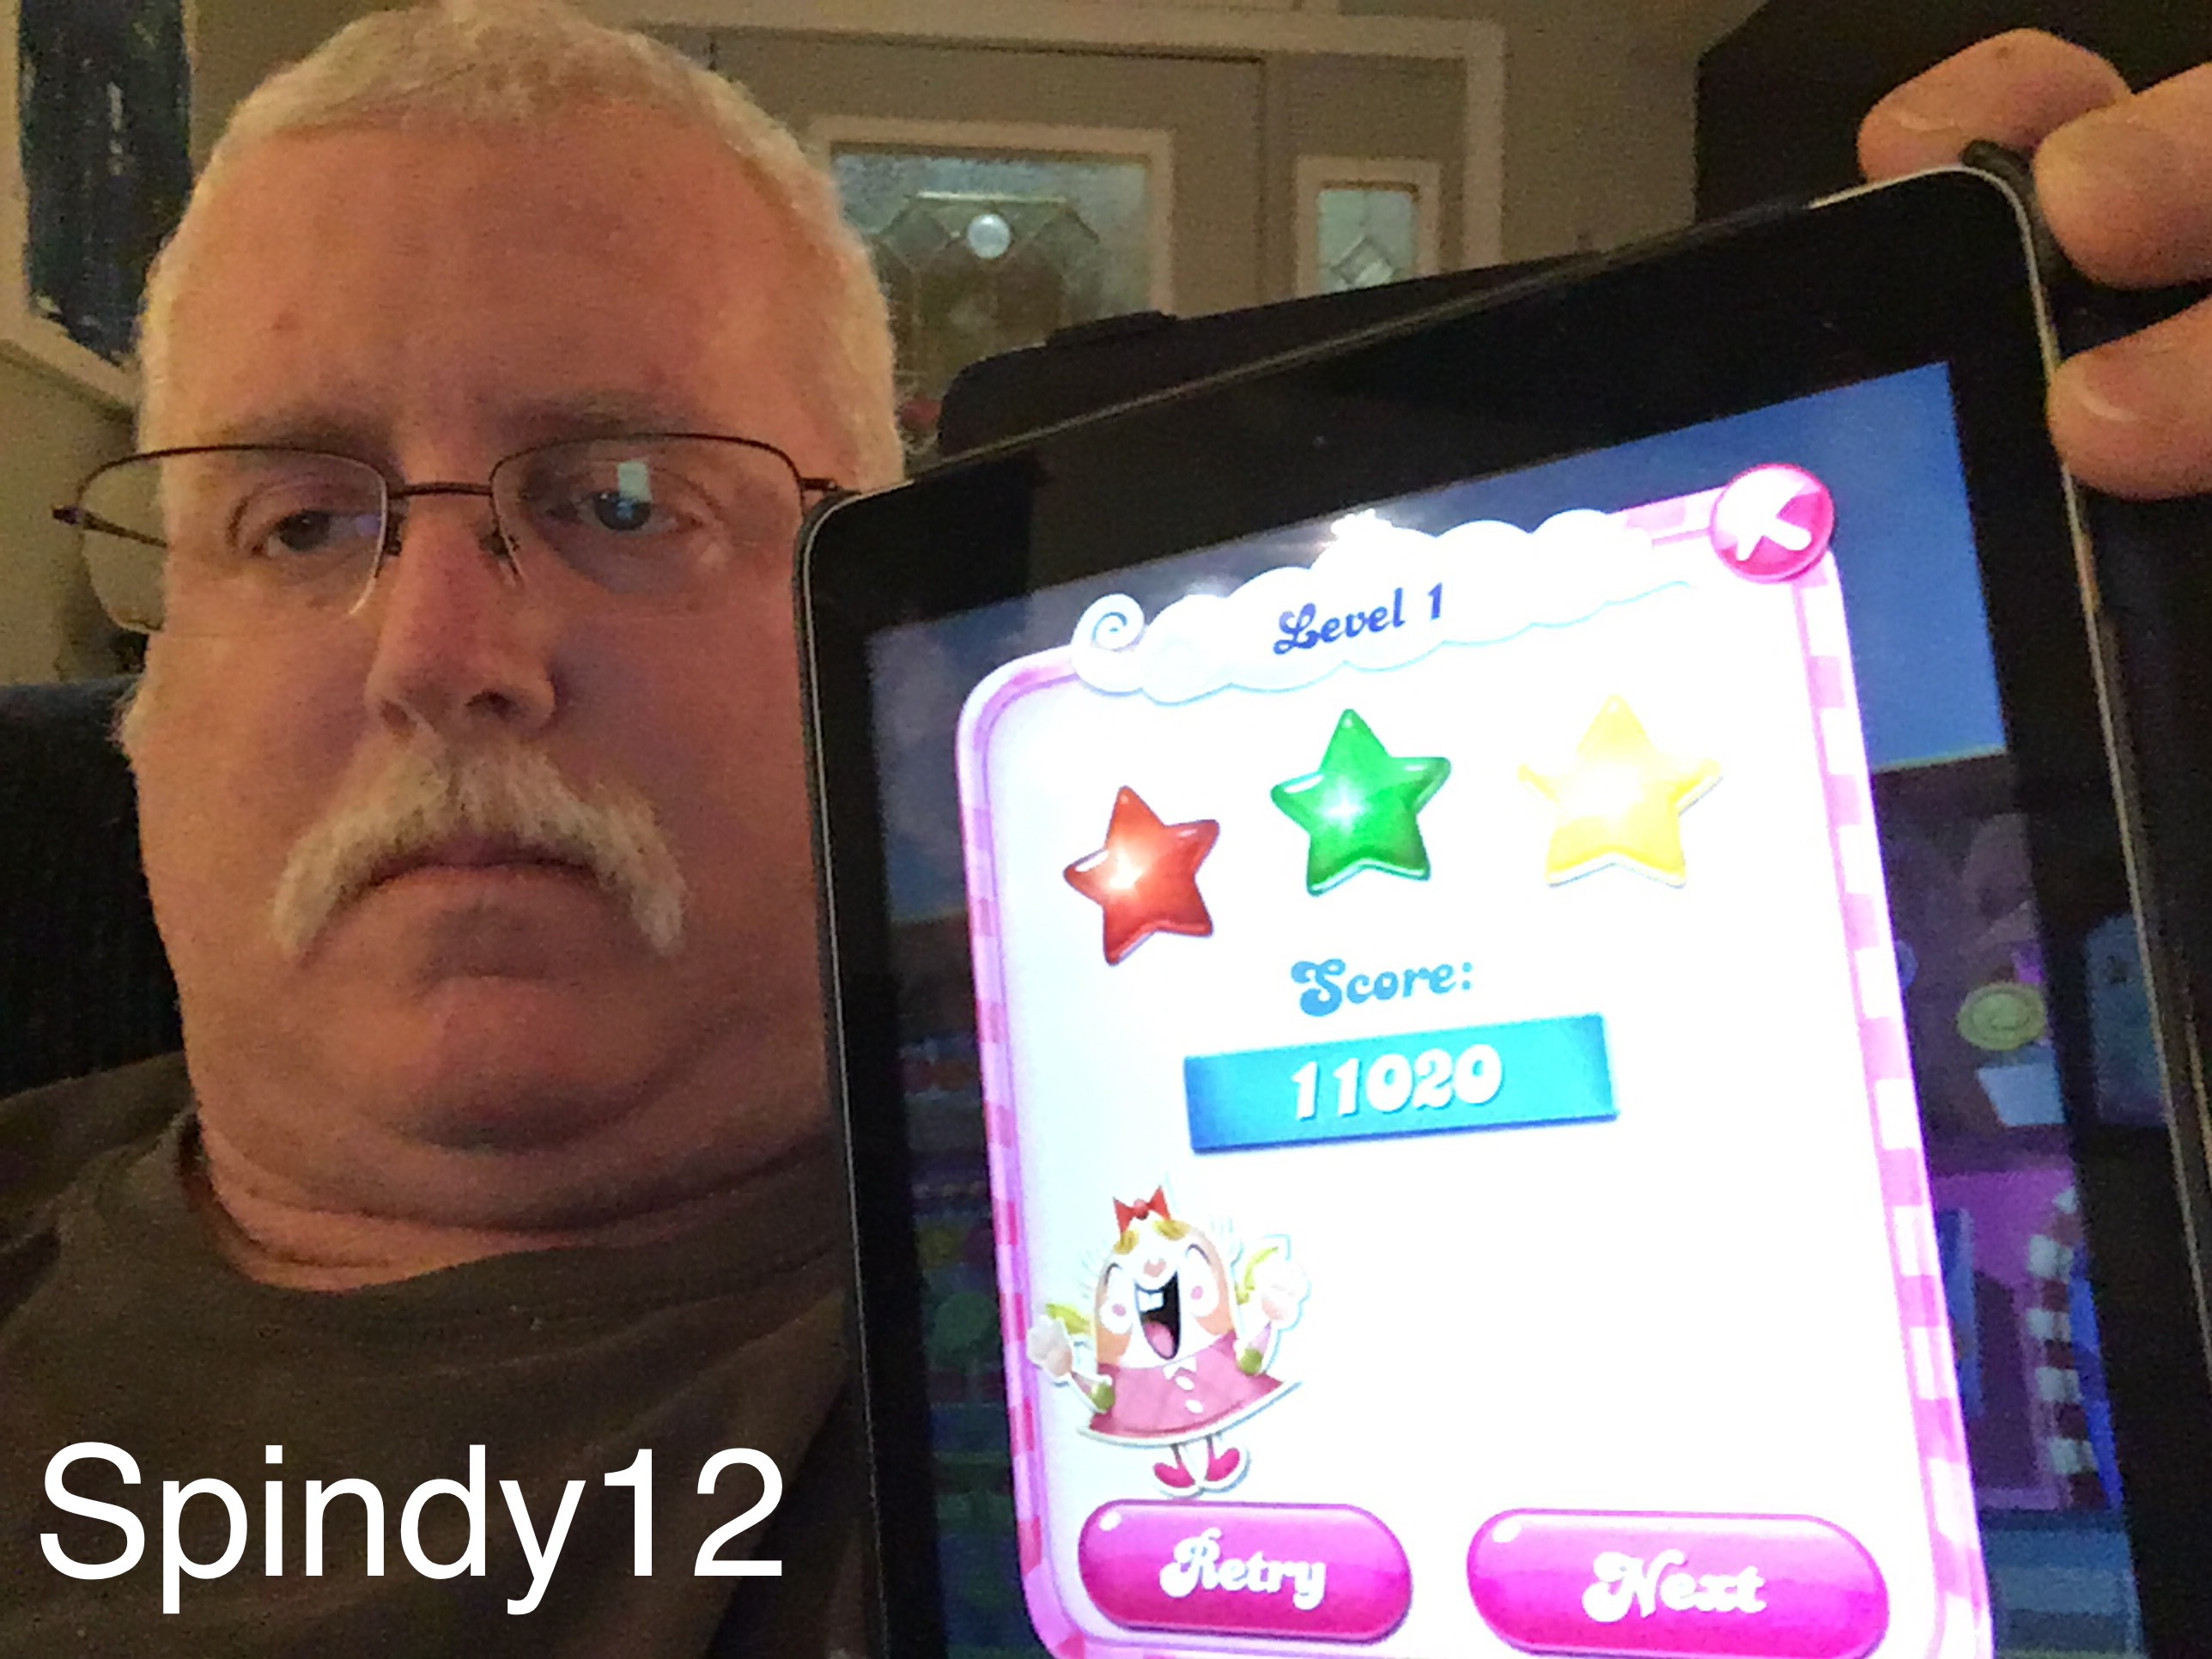 Spindy12: Candy Crush Saga: Level 001 (iOS) 11,020 points on 2016-12-20 15:26:36